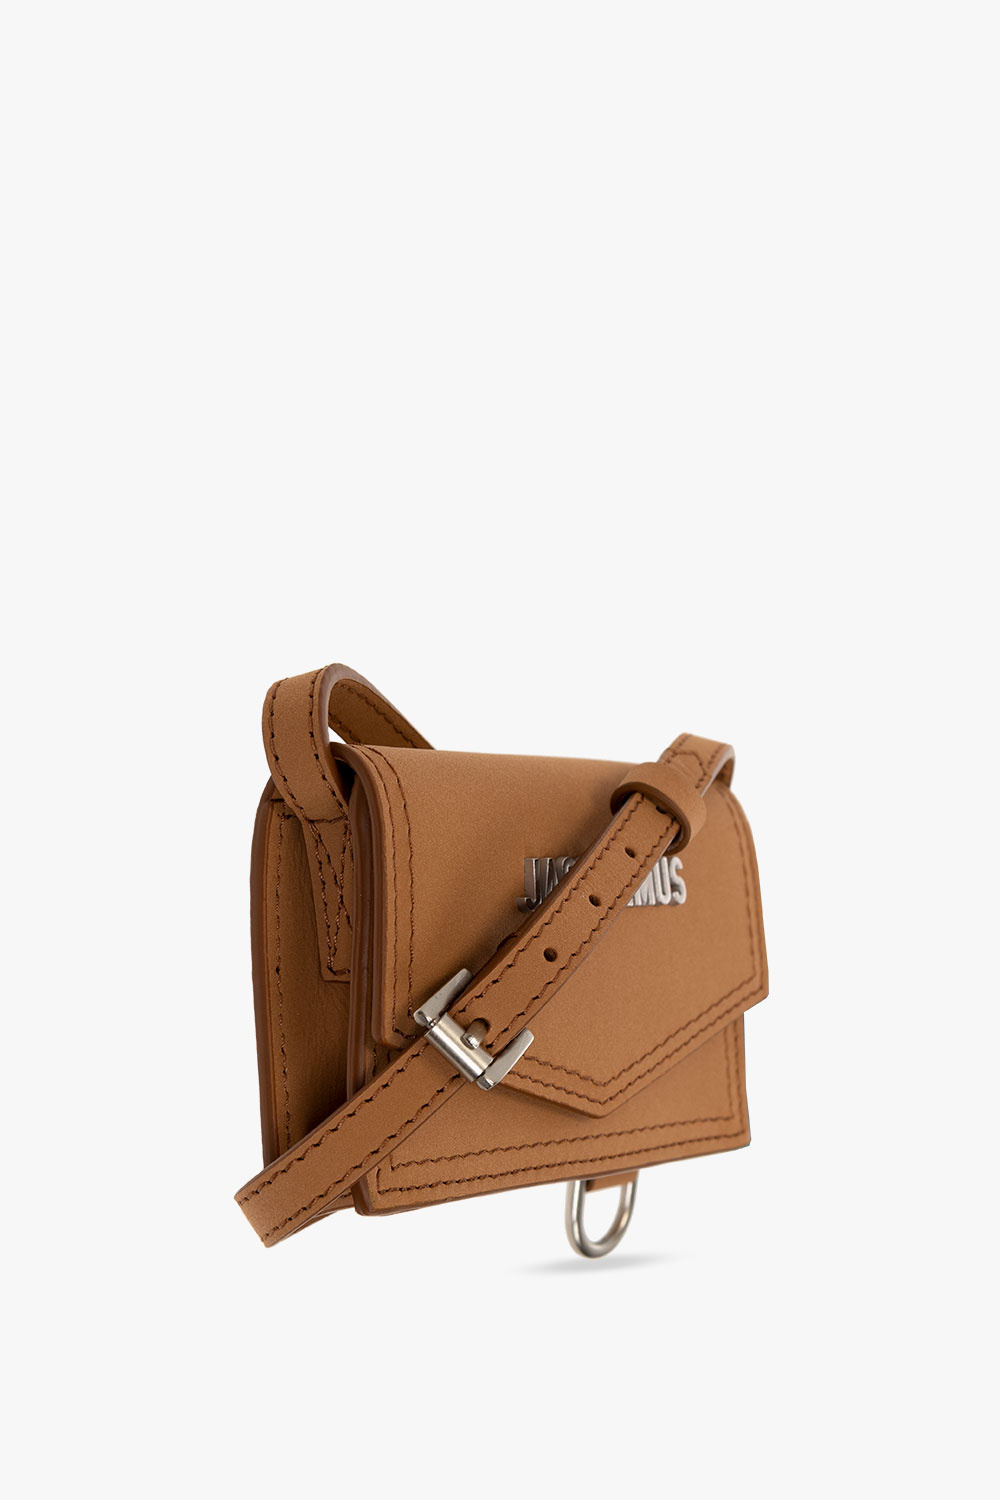 Jacquemus ‘Azur’ pouch with strap